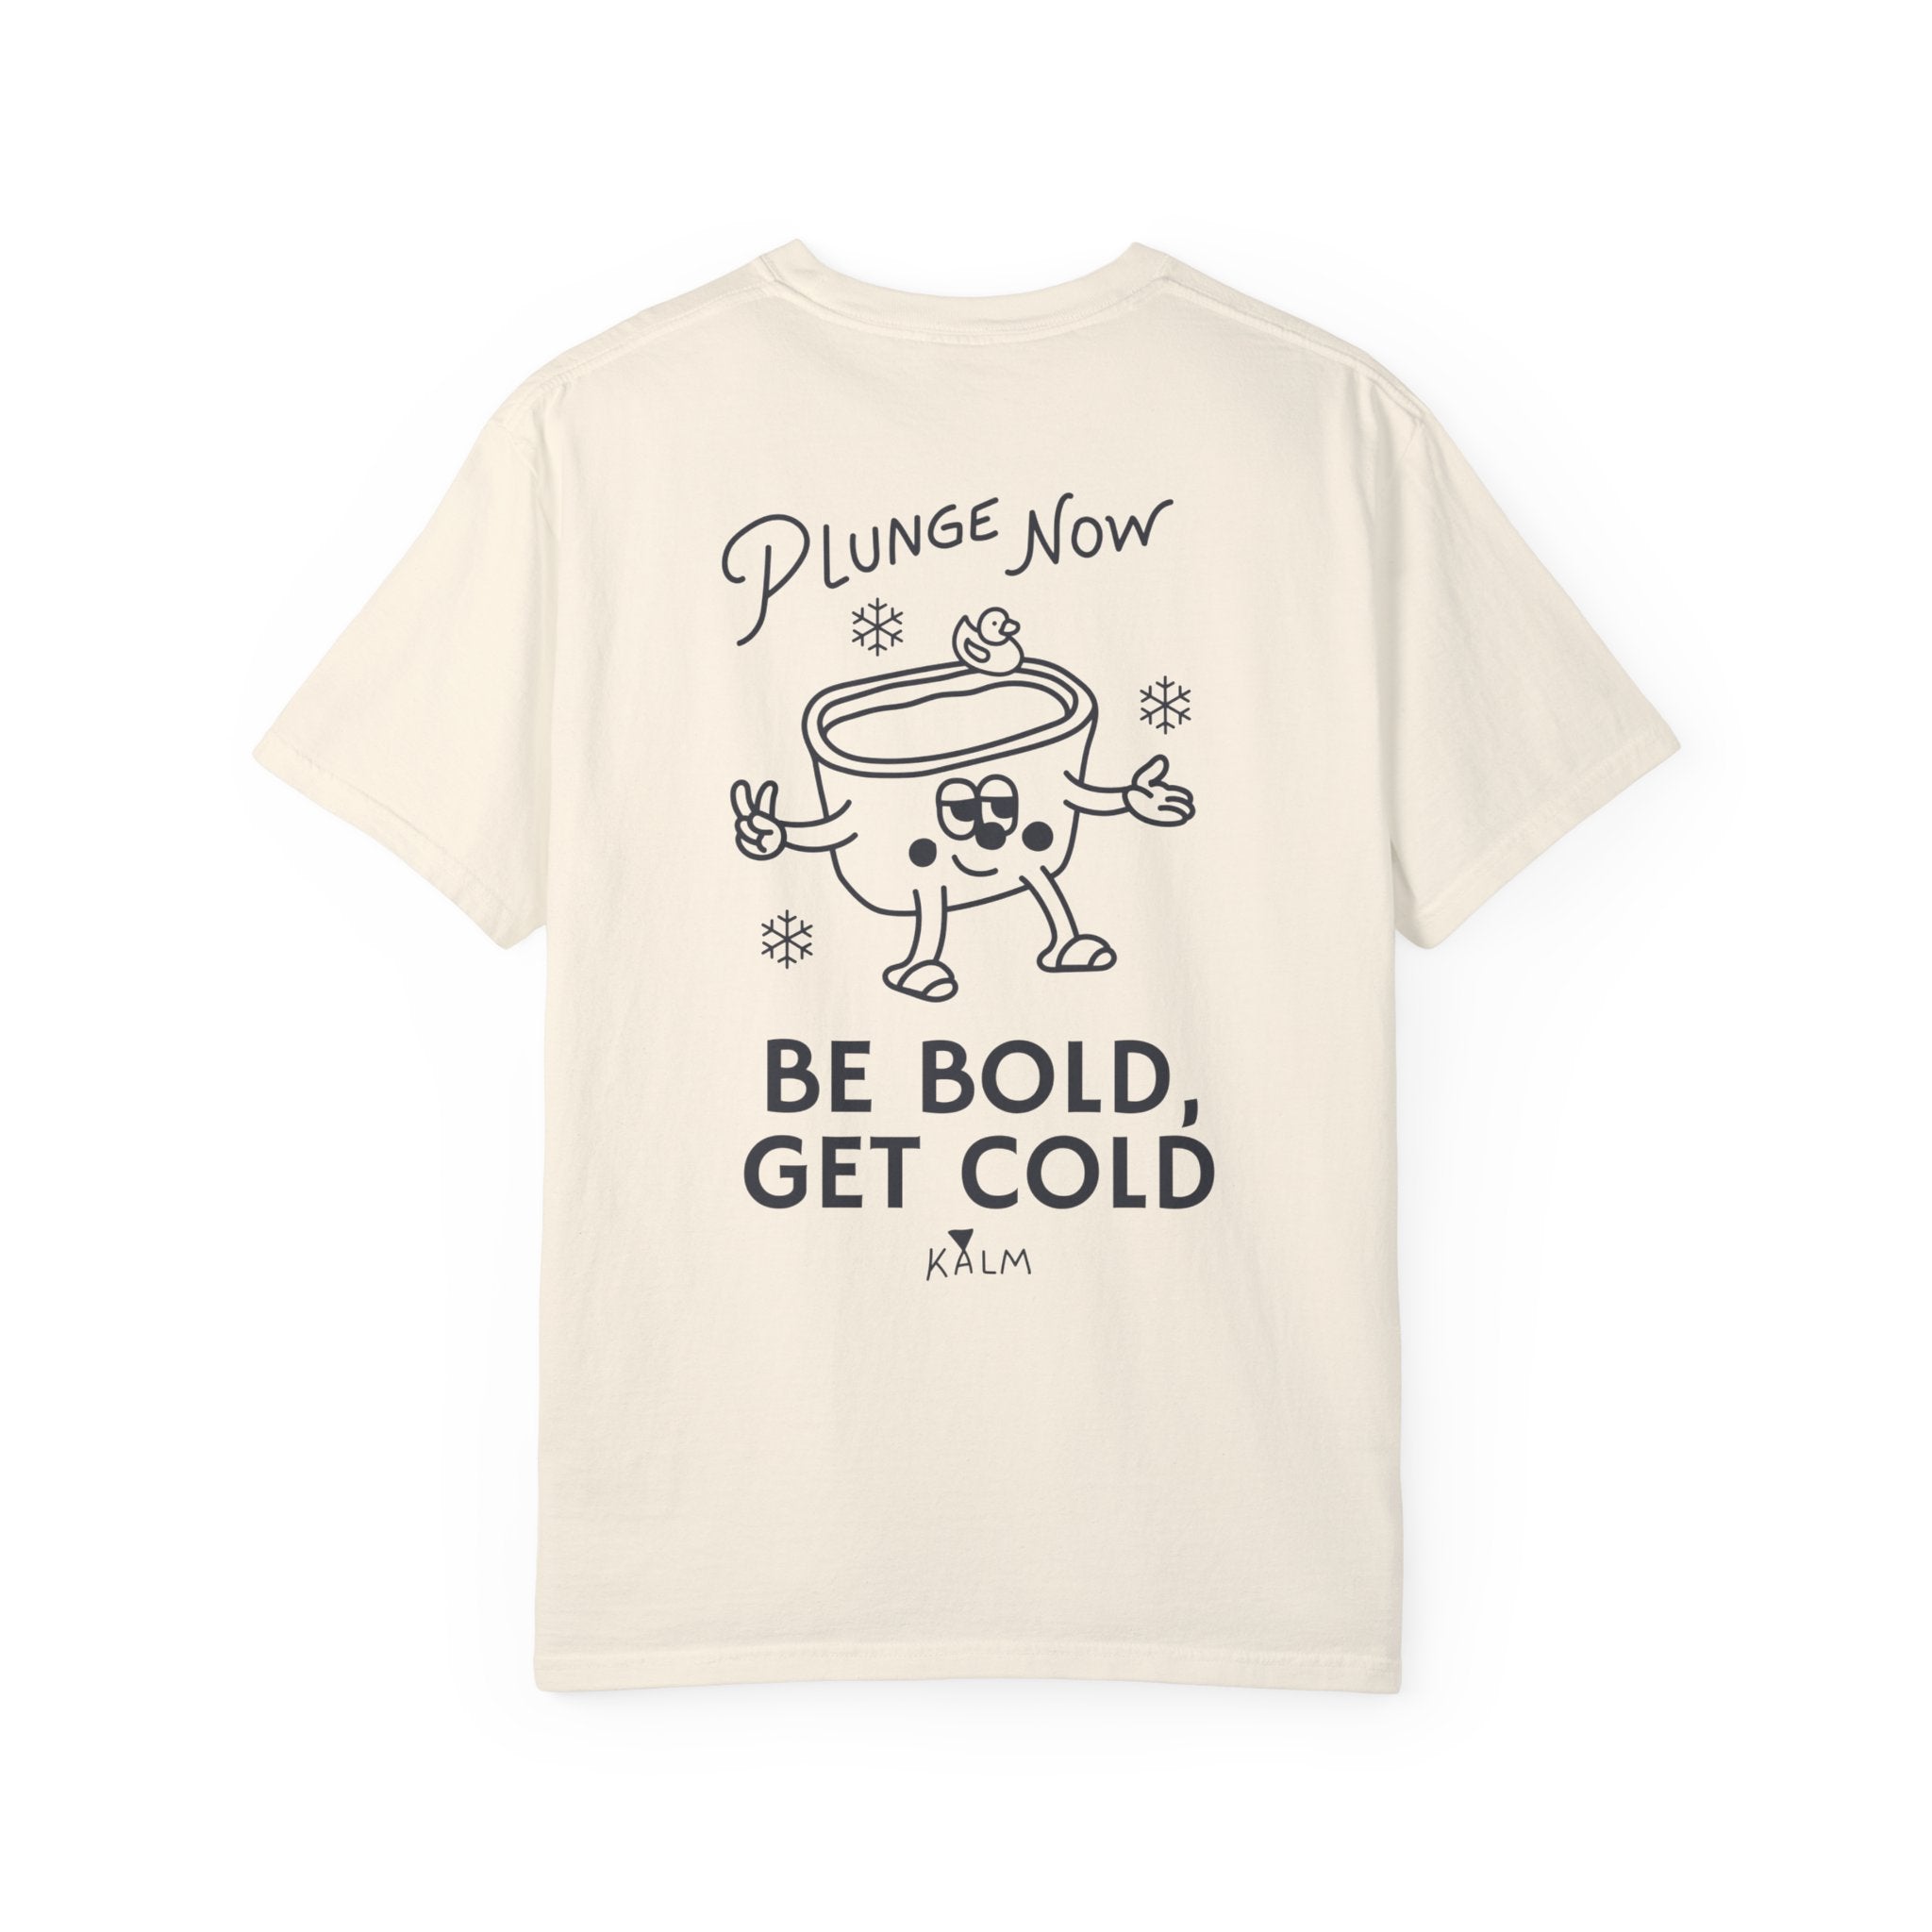 Be Bold, Get Cold Garment-Dyed T-shirt